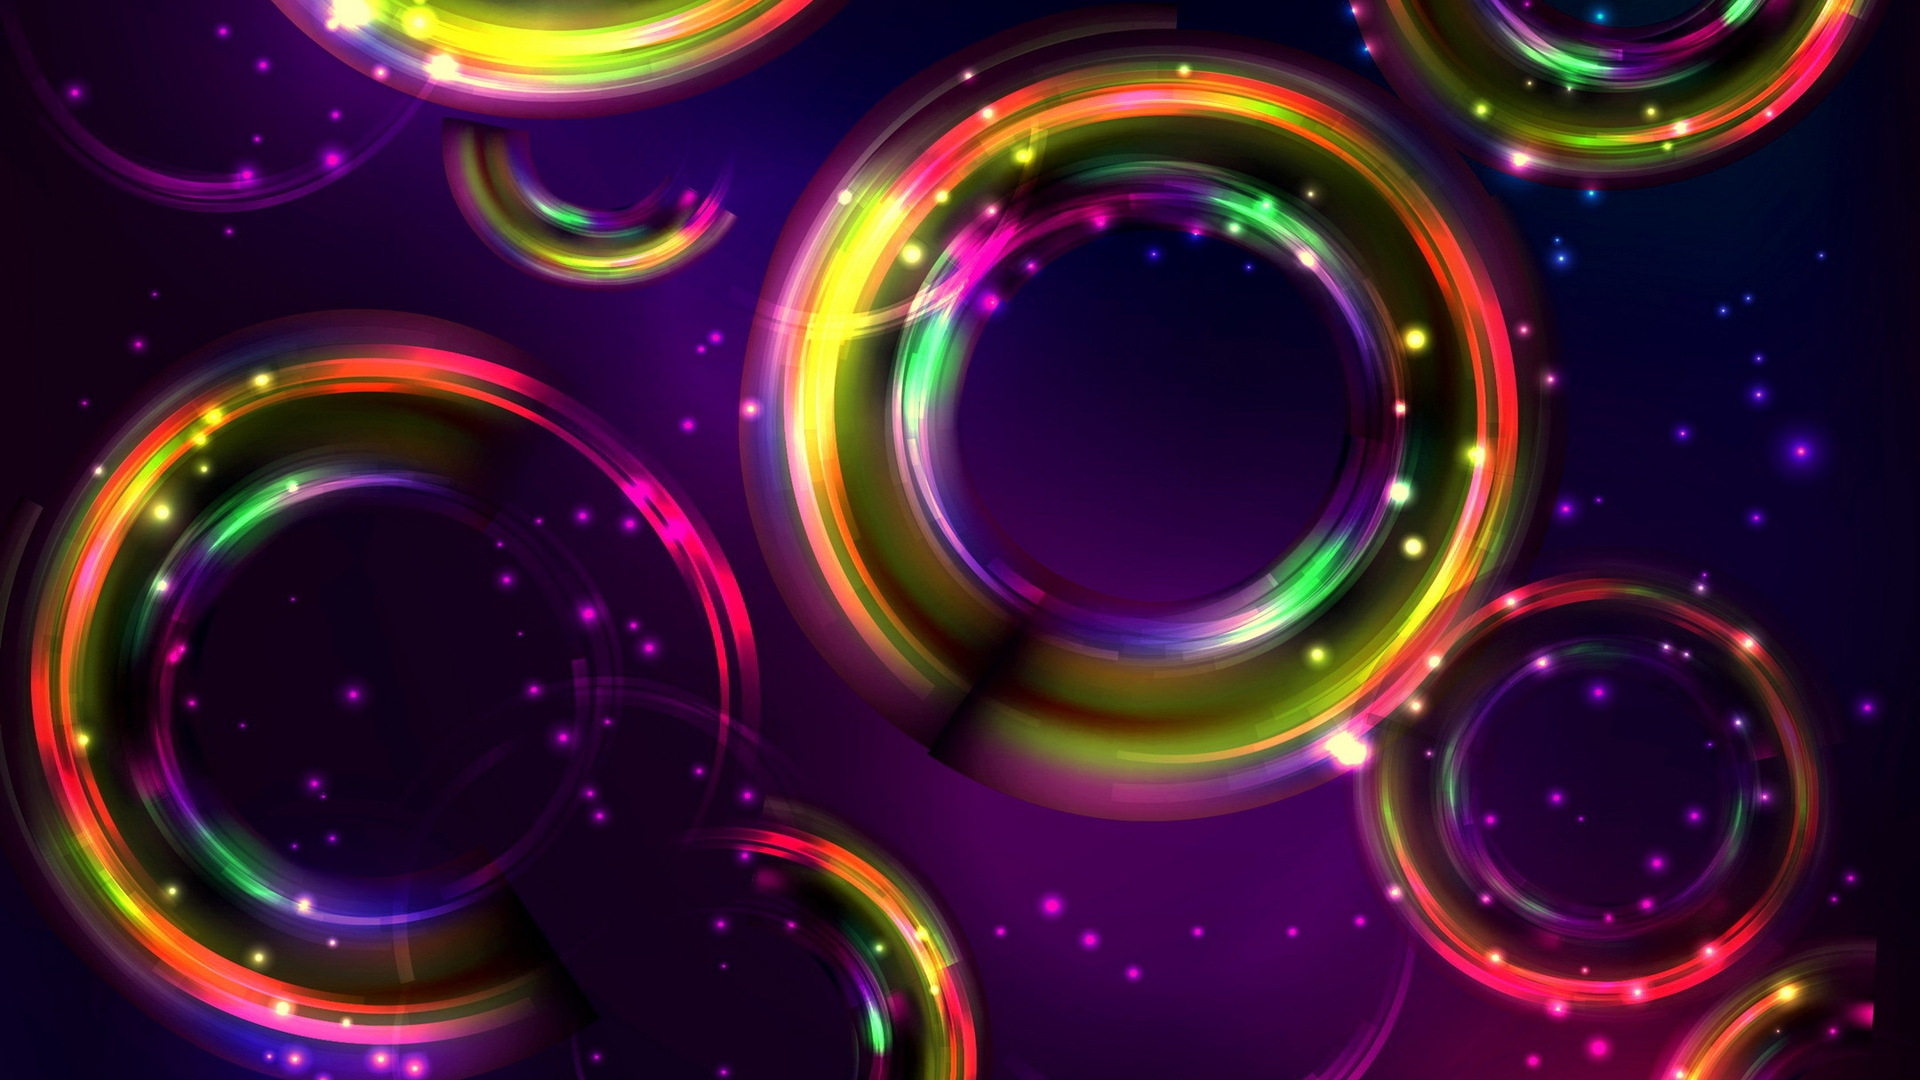 Colorful Circles for 1920 x 1080 HDTV 1080p resolution